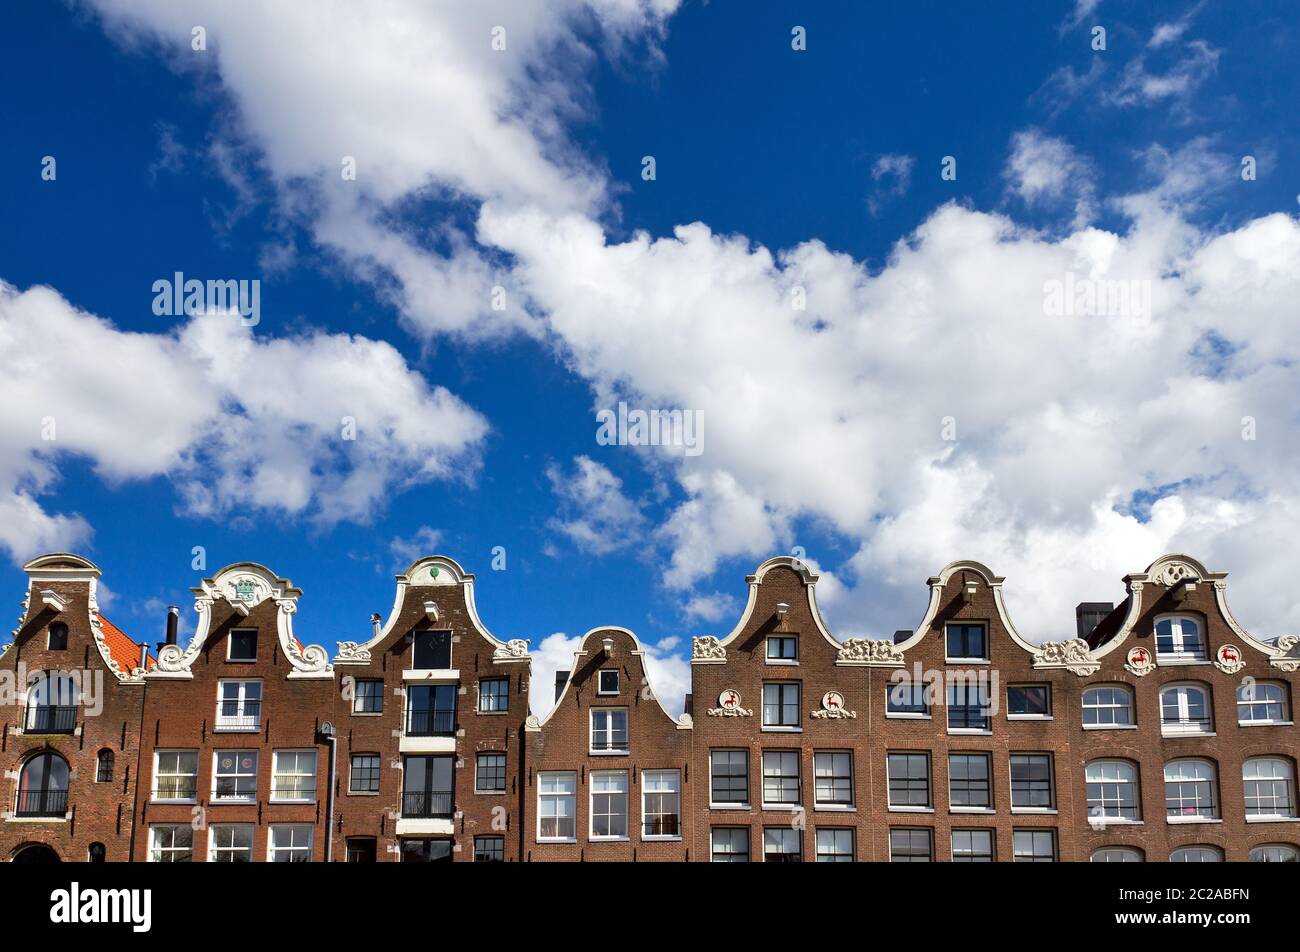 Beautiful cityscape view of Amsterdam, the Netherlands, in summer Stock Photo